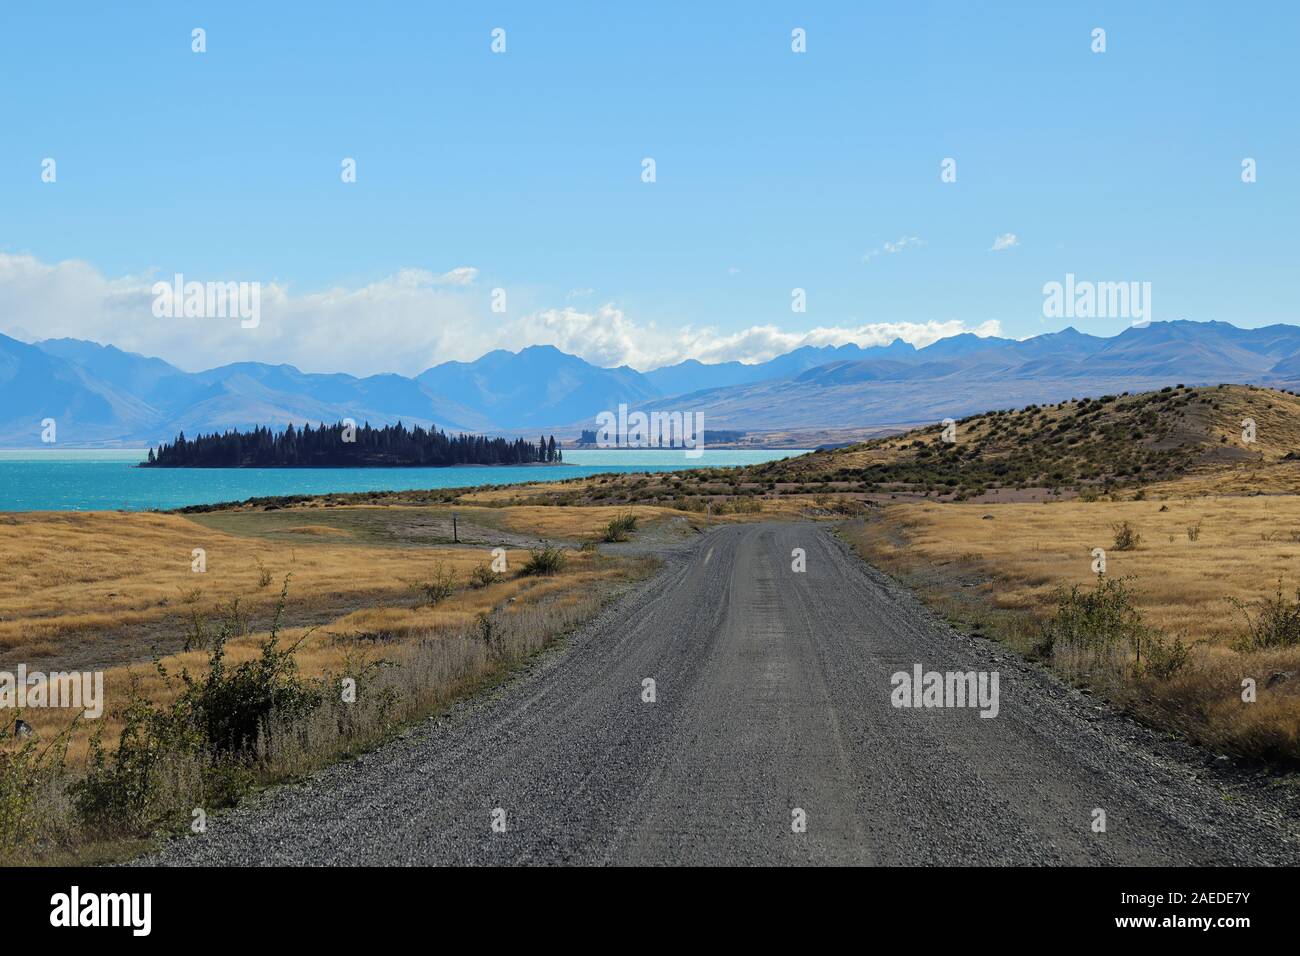 Empty road with a blue lake and mountains in the background Stock Photo